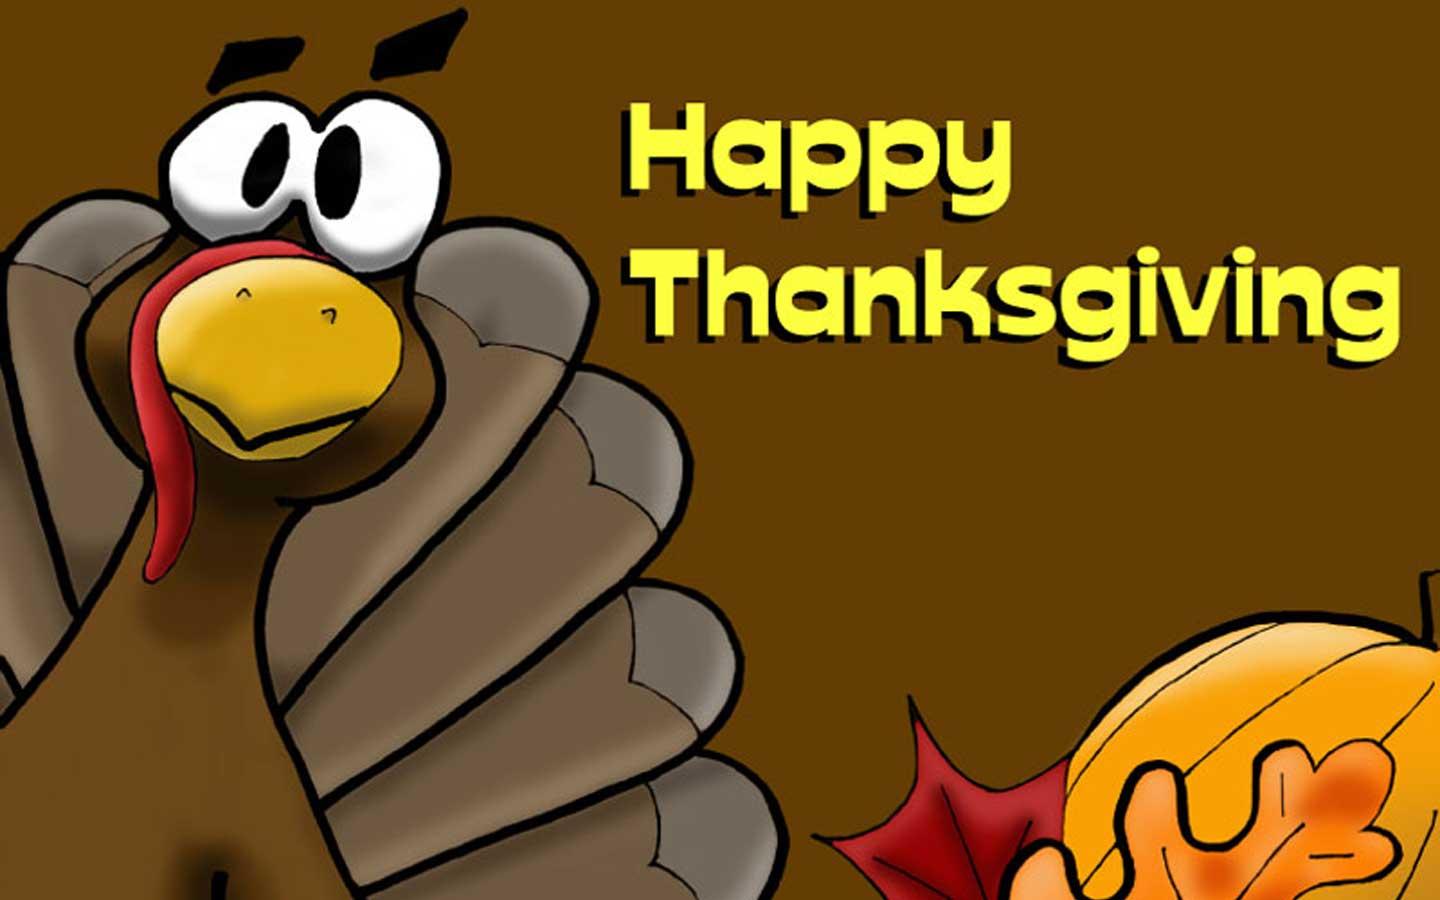 Wallpapers For > Cute Thanksgiving Backgrounds